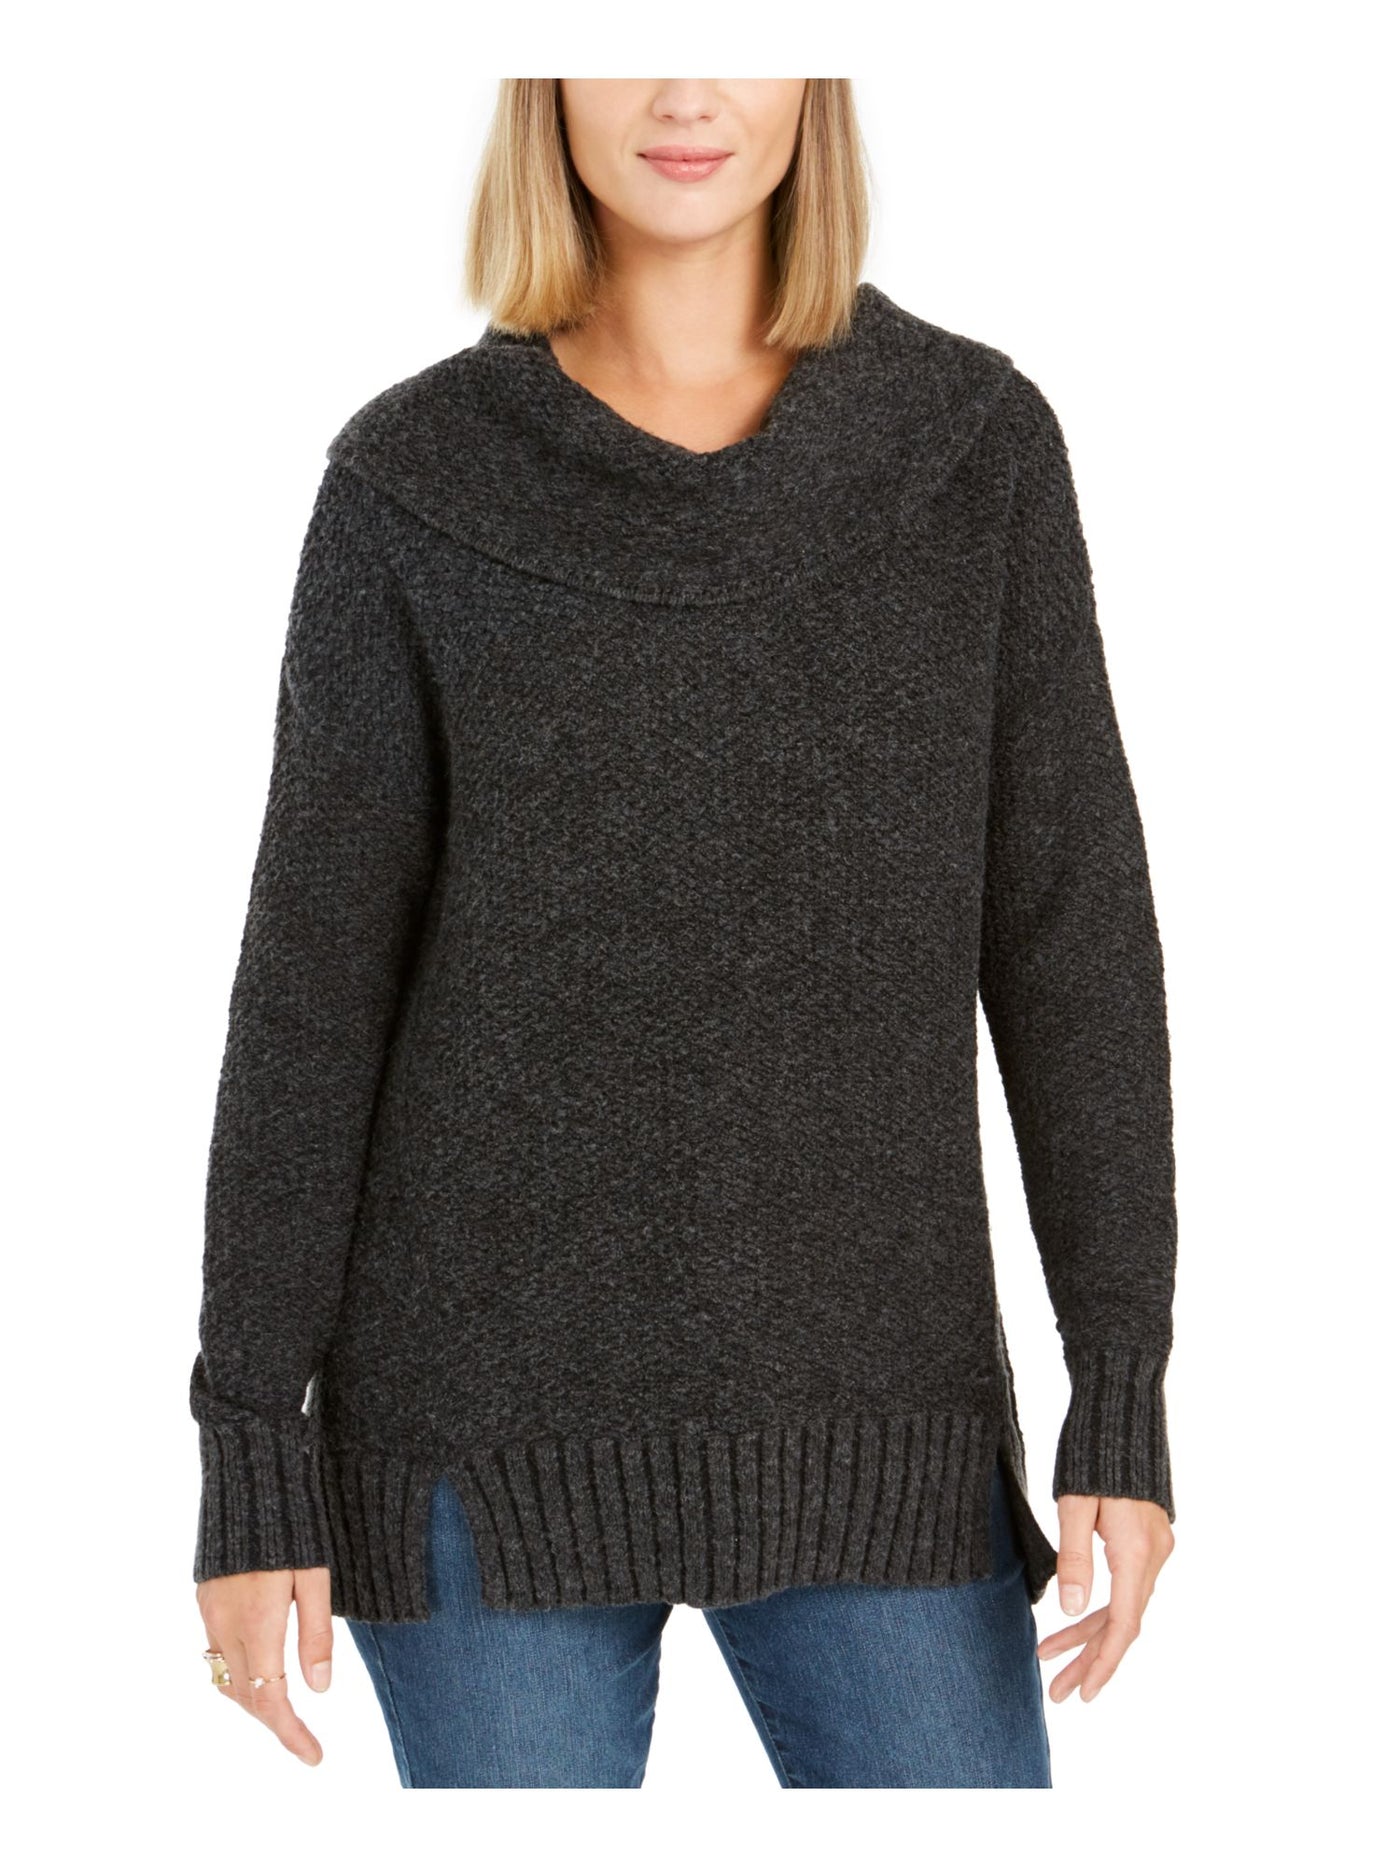 STYLE & COMPANY Womens Black Textured Long Sleeve Cowl Neck Sweater Petites PS